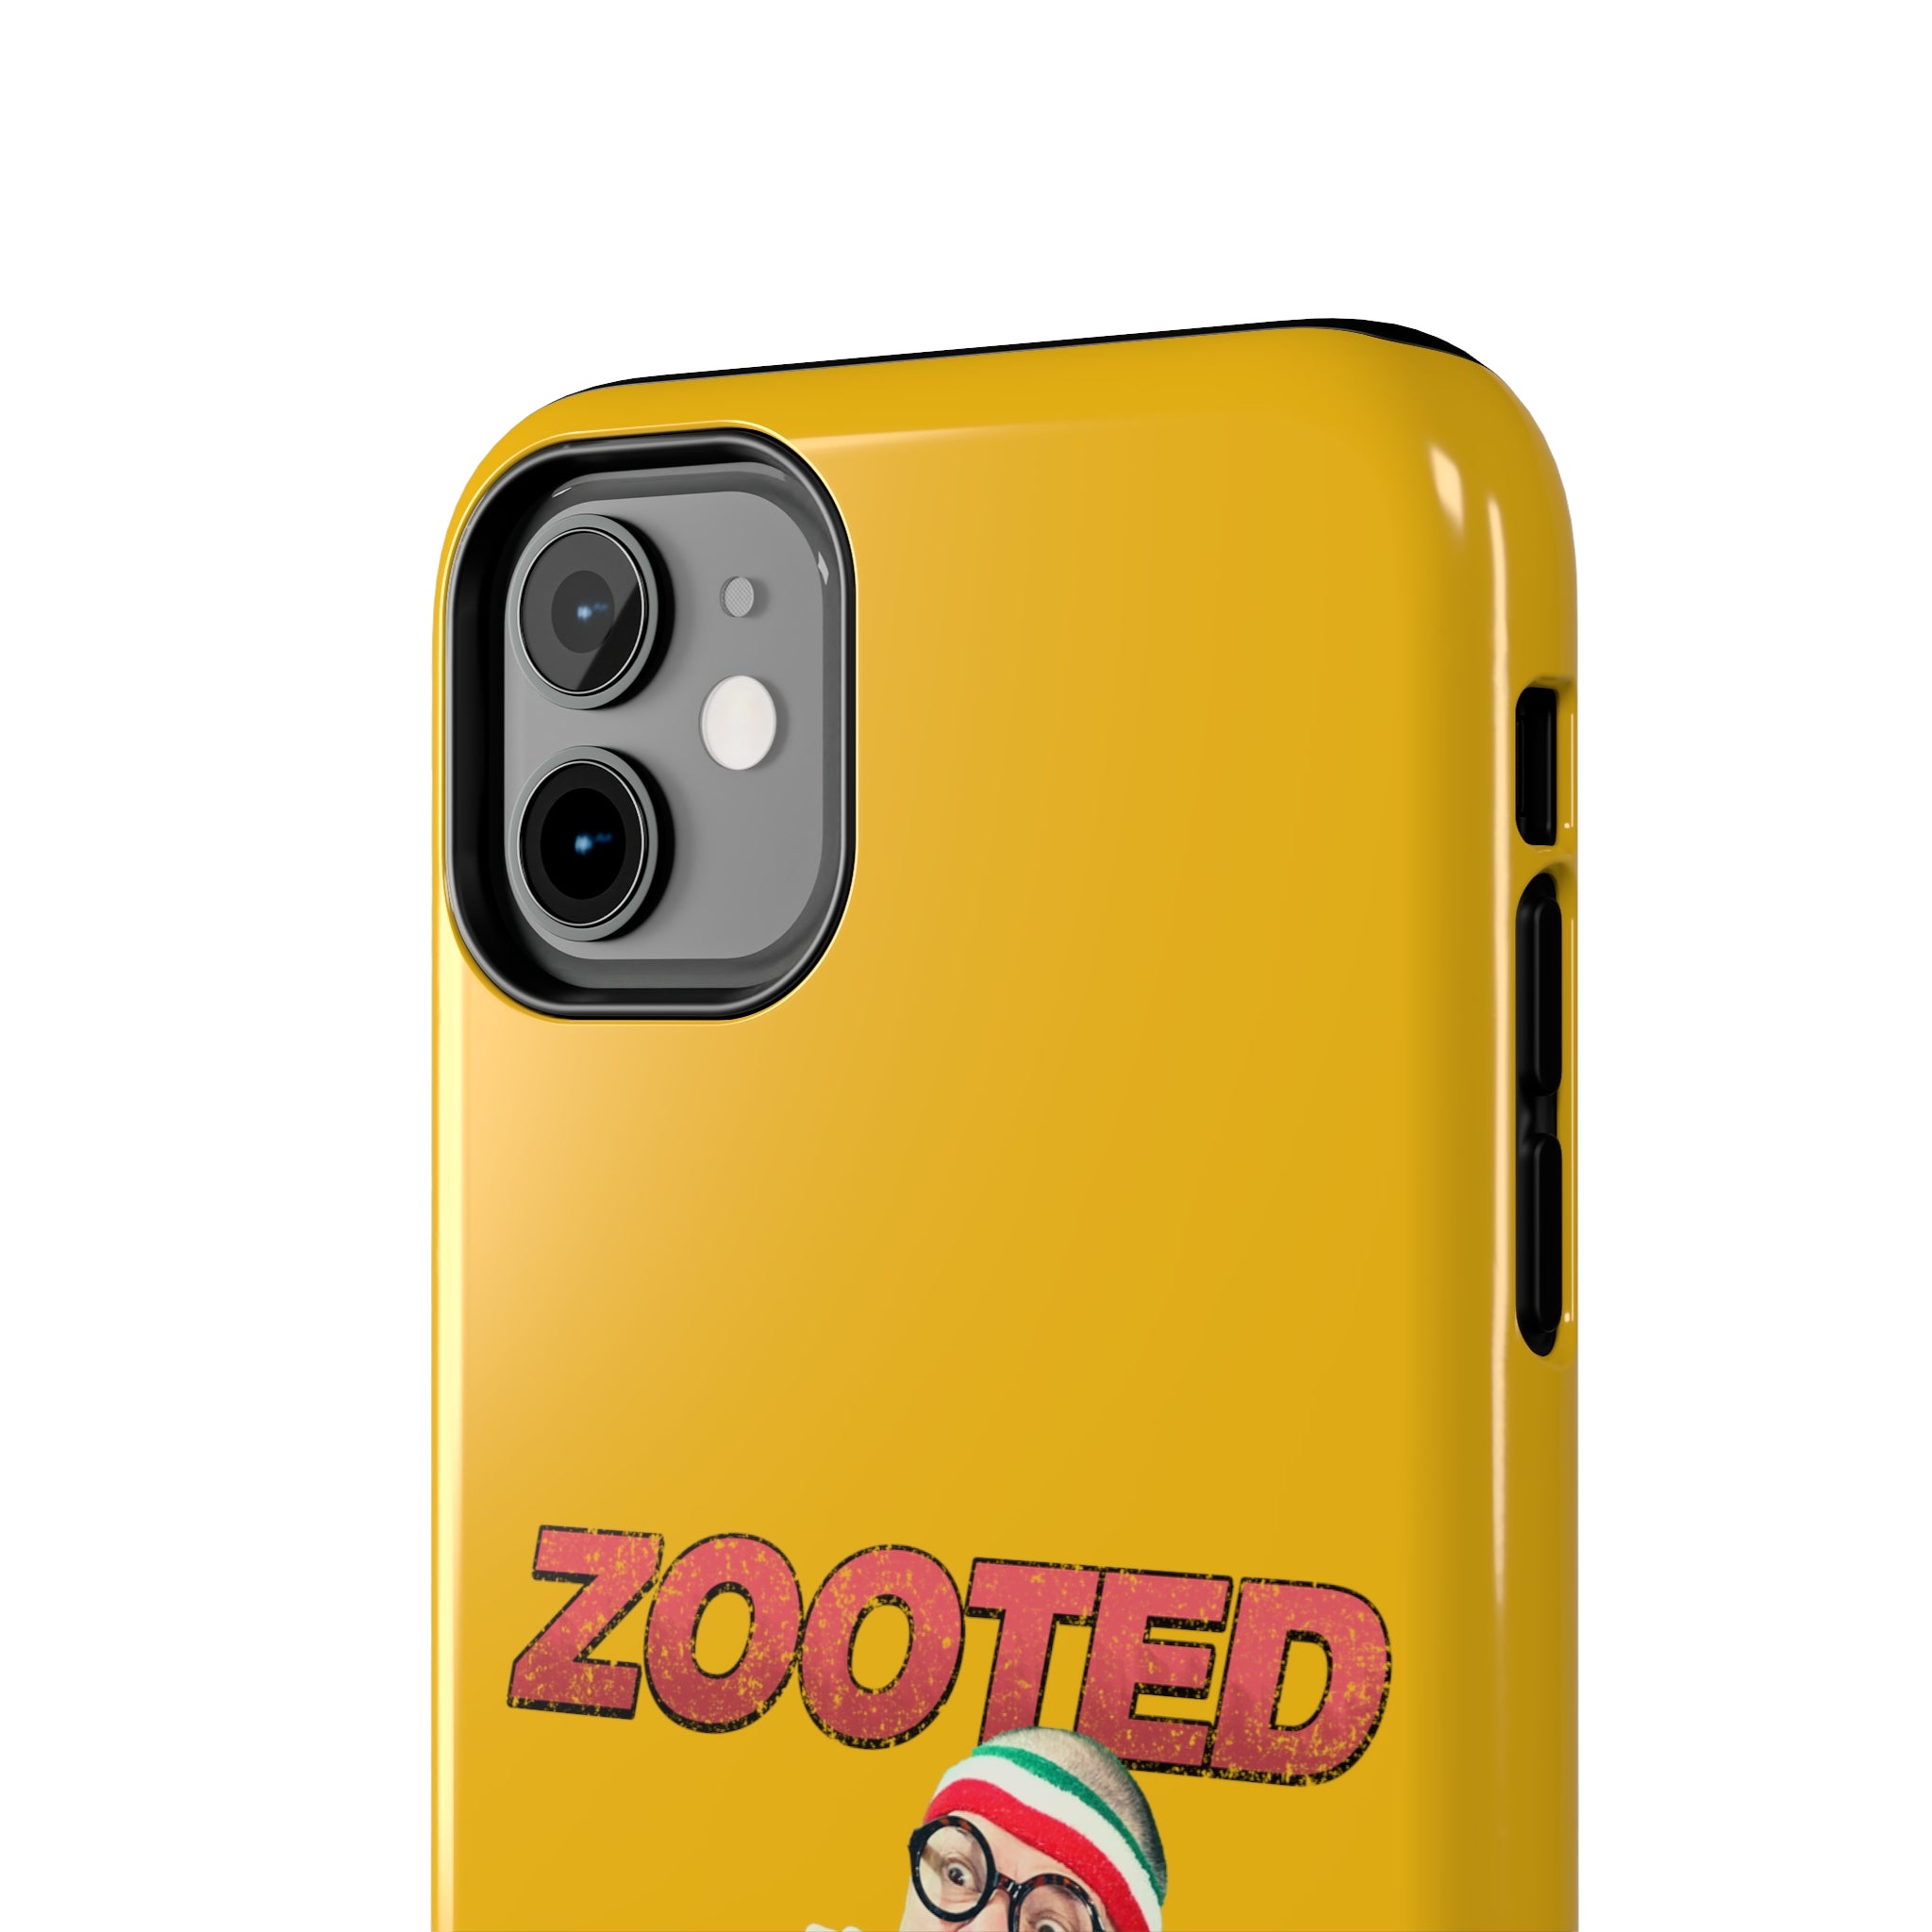 ZOOTED YELLOW Tough Phone Cases